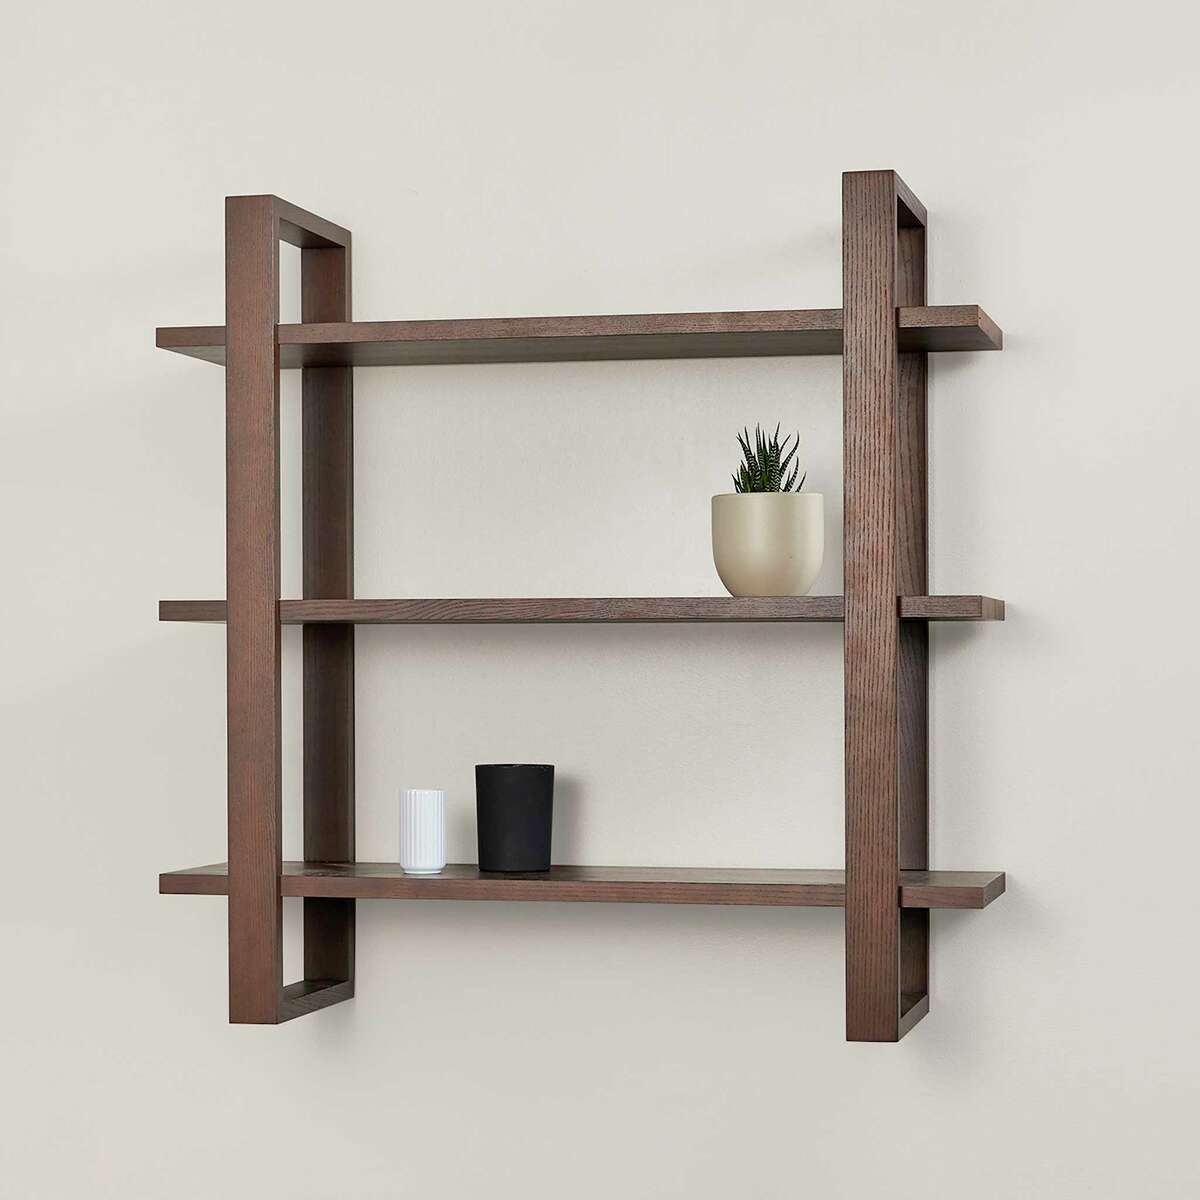 Burrow Index wall shelves ($325 each, westelm.com), available in a white, walnut or oak finish, can be grouped horizontally or vertically to create as much storage as needed.